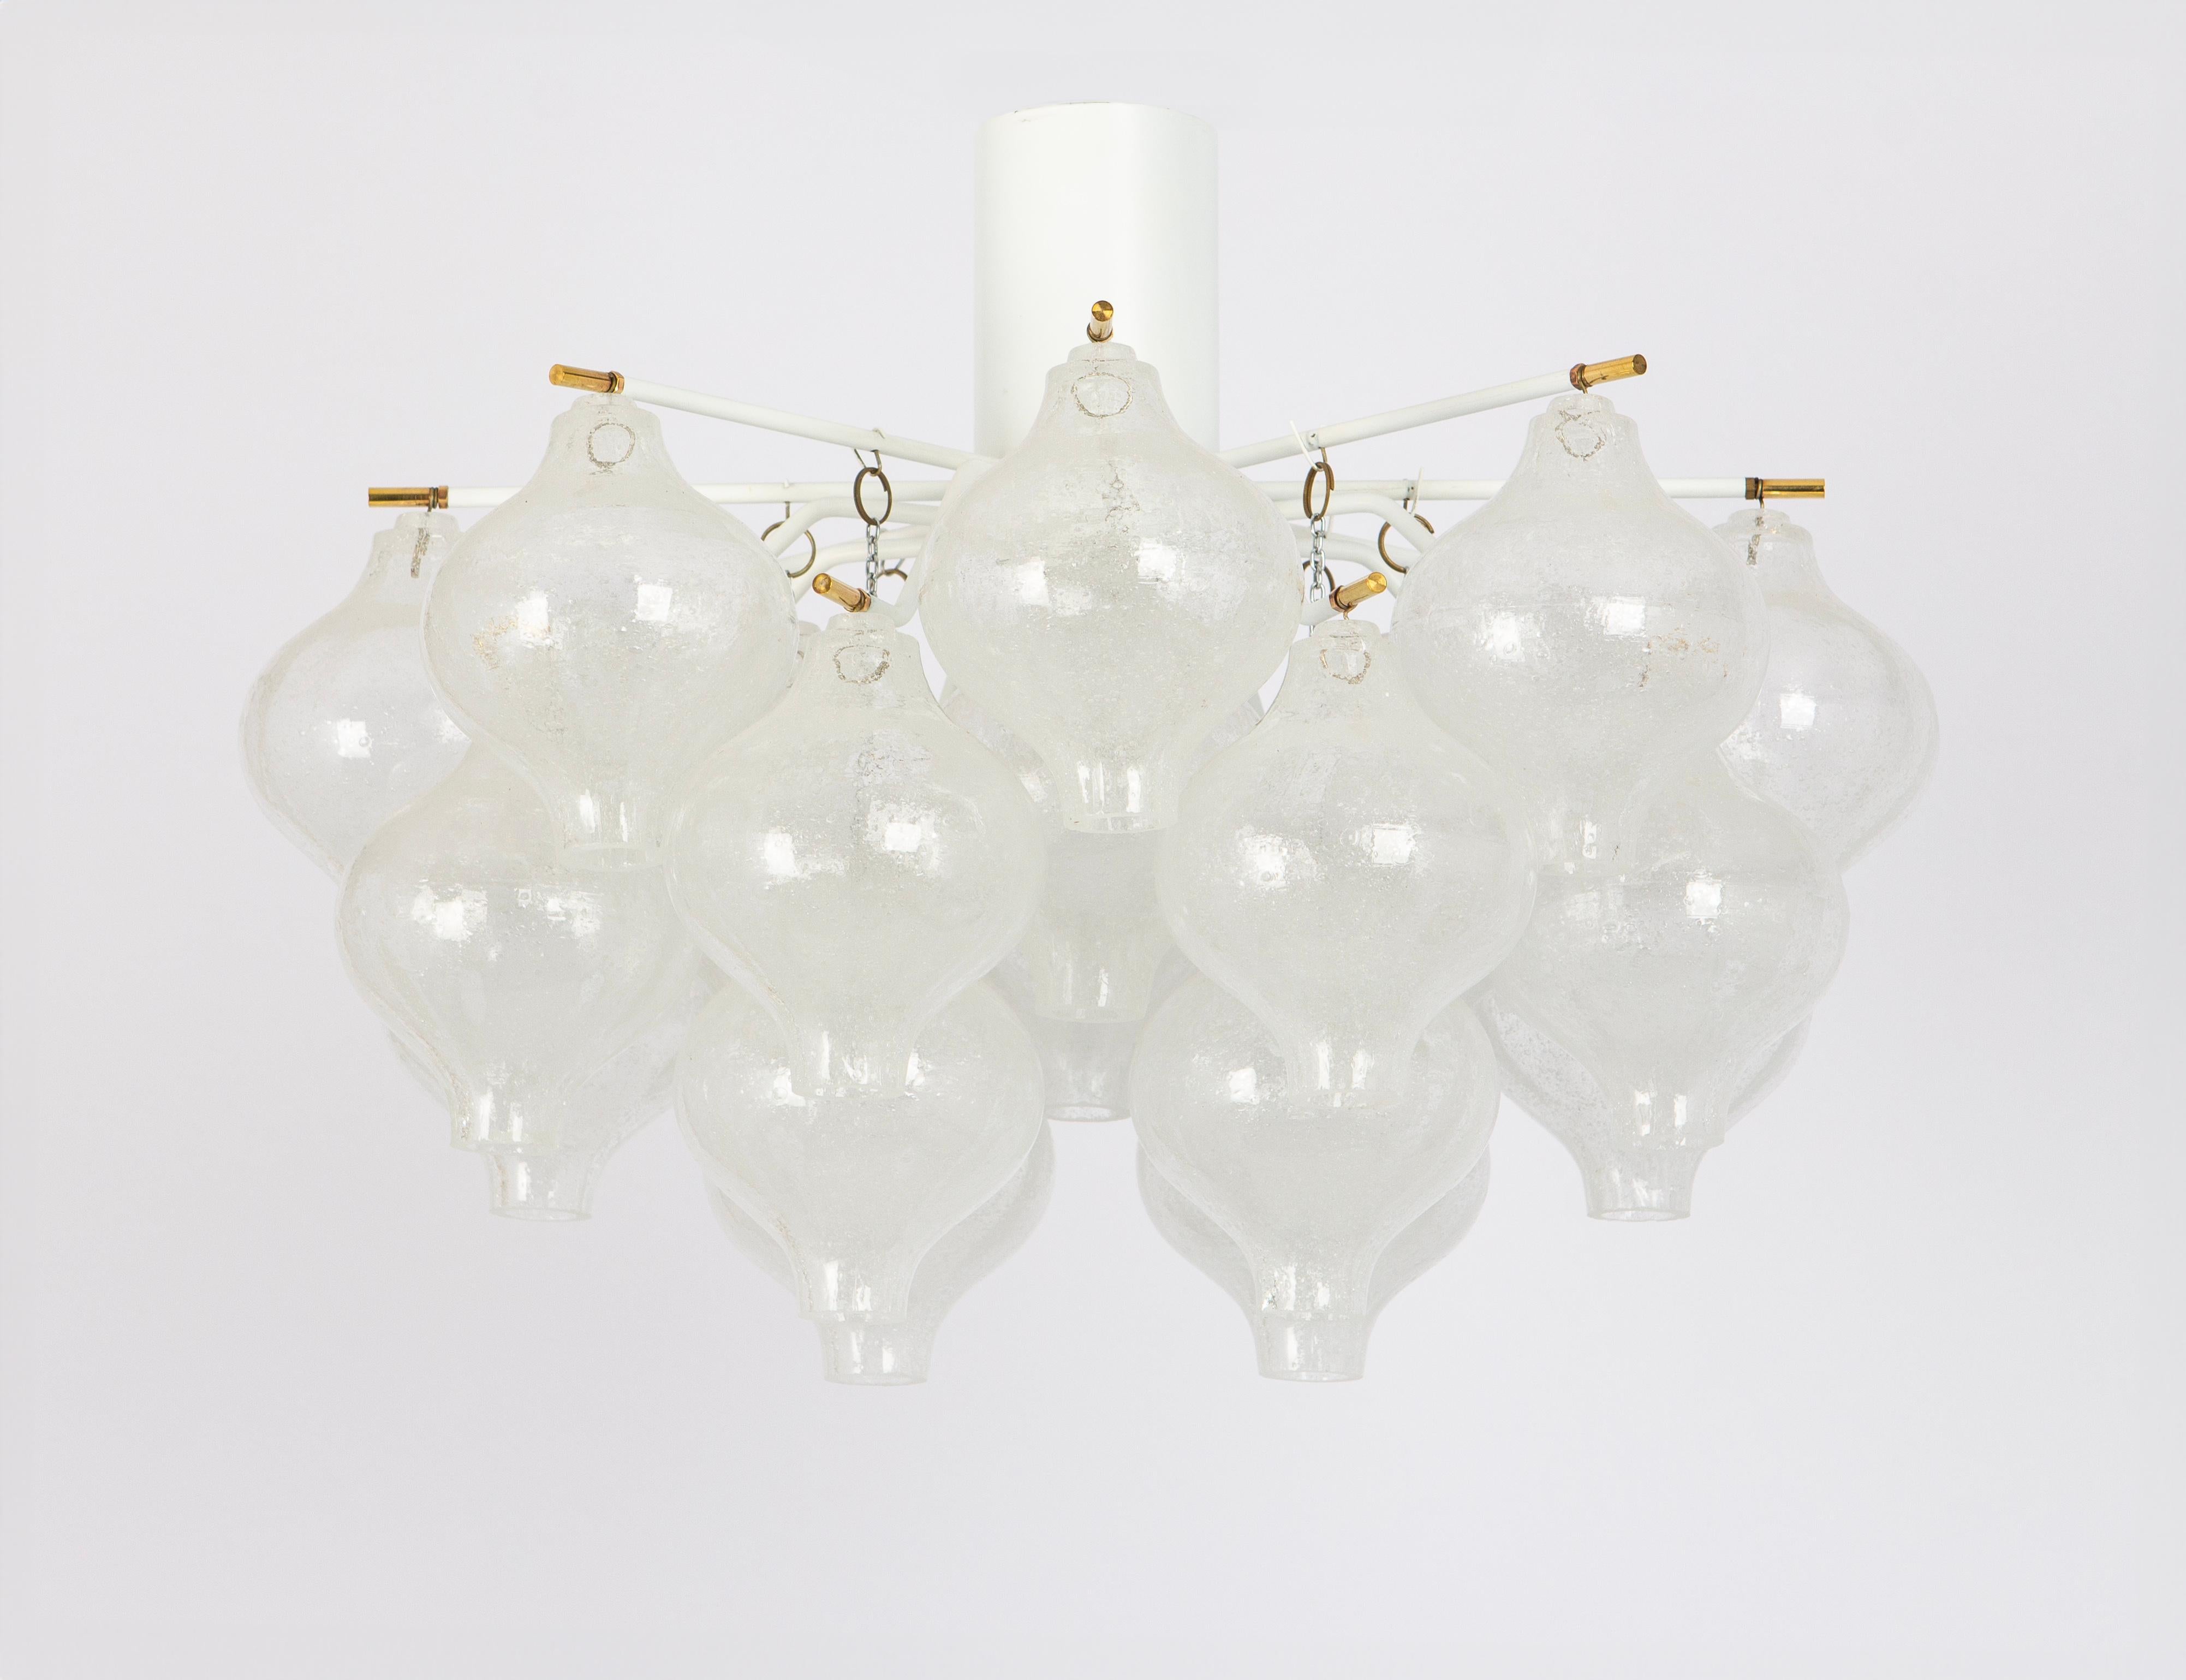 Wonderful onion-shaped -Tulipan glass Flush mount light. Twenty-four hand-blown glasses suspended on a white colored metal frame.
Best of design from the 1960s by Kalmar, Austria. High quality of the materials.
Beyond its practical function, the